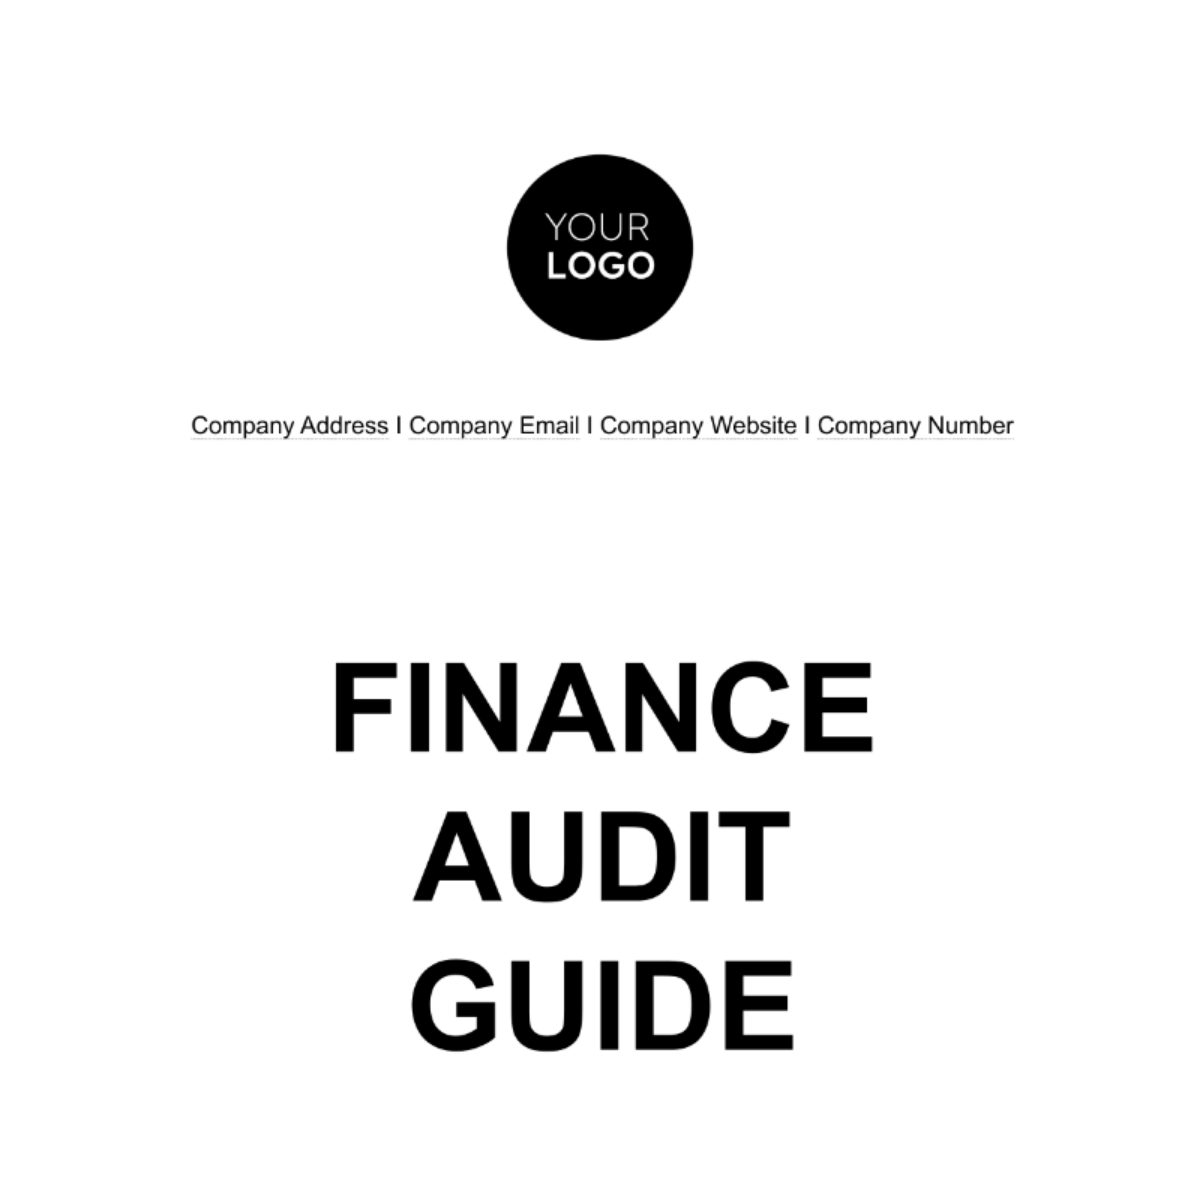 Finance Audit Guide Template